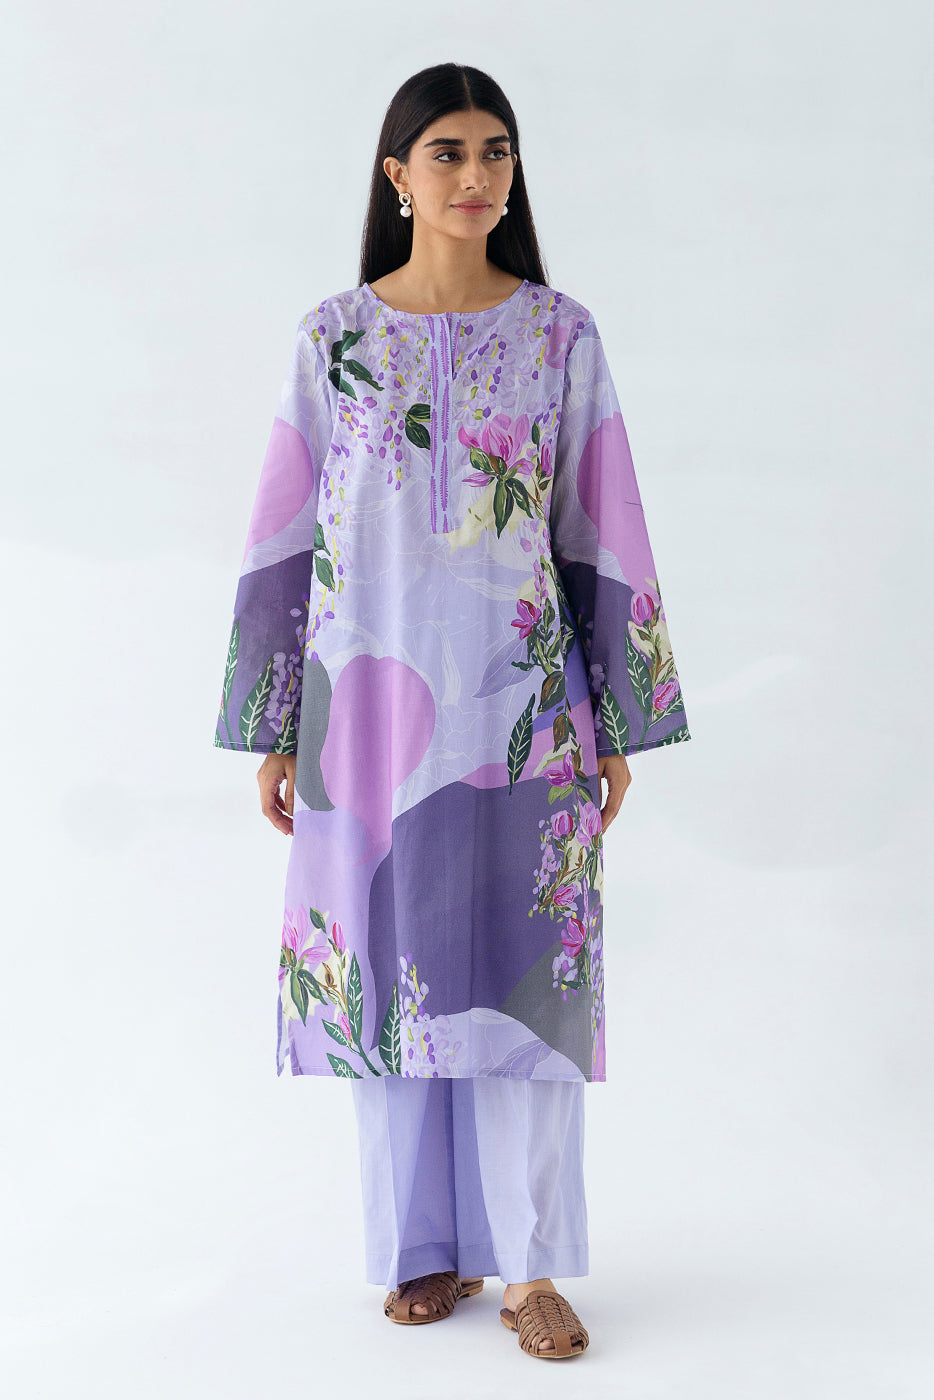 1 PIECE - PRINTED CAMBRIC SHIRT - AMETHYST (UNSTITCHED) - BEECHTREE